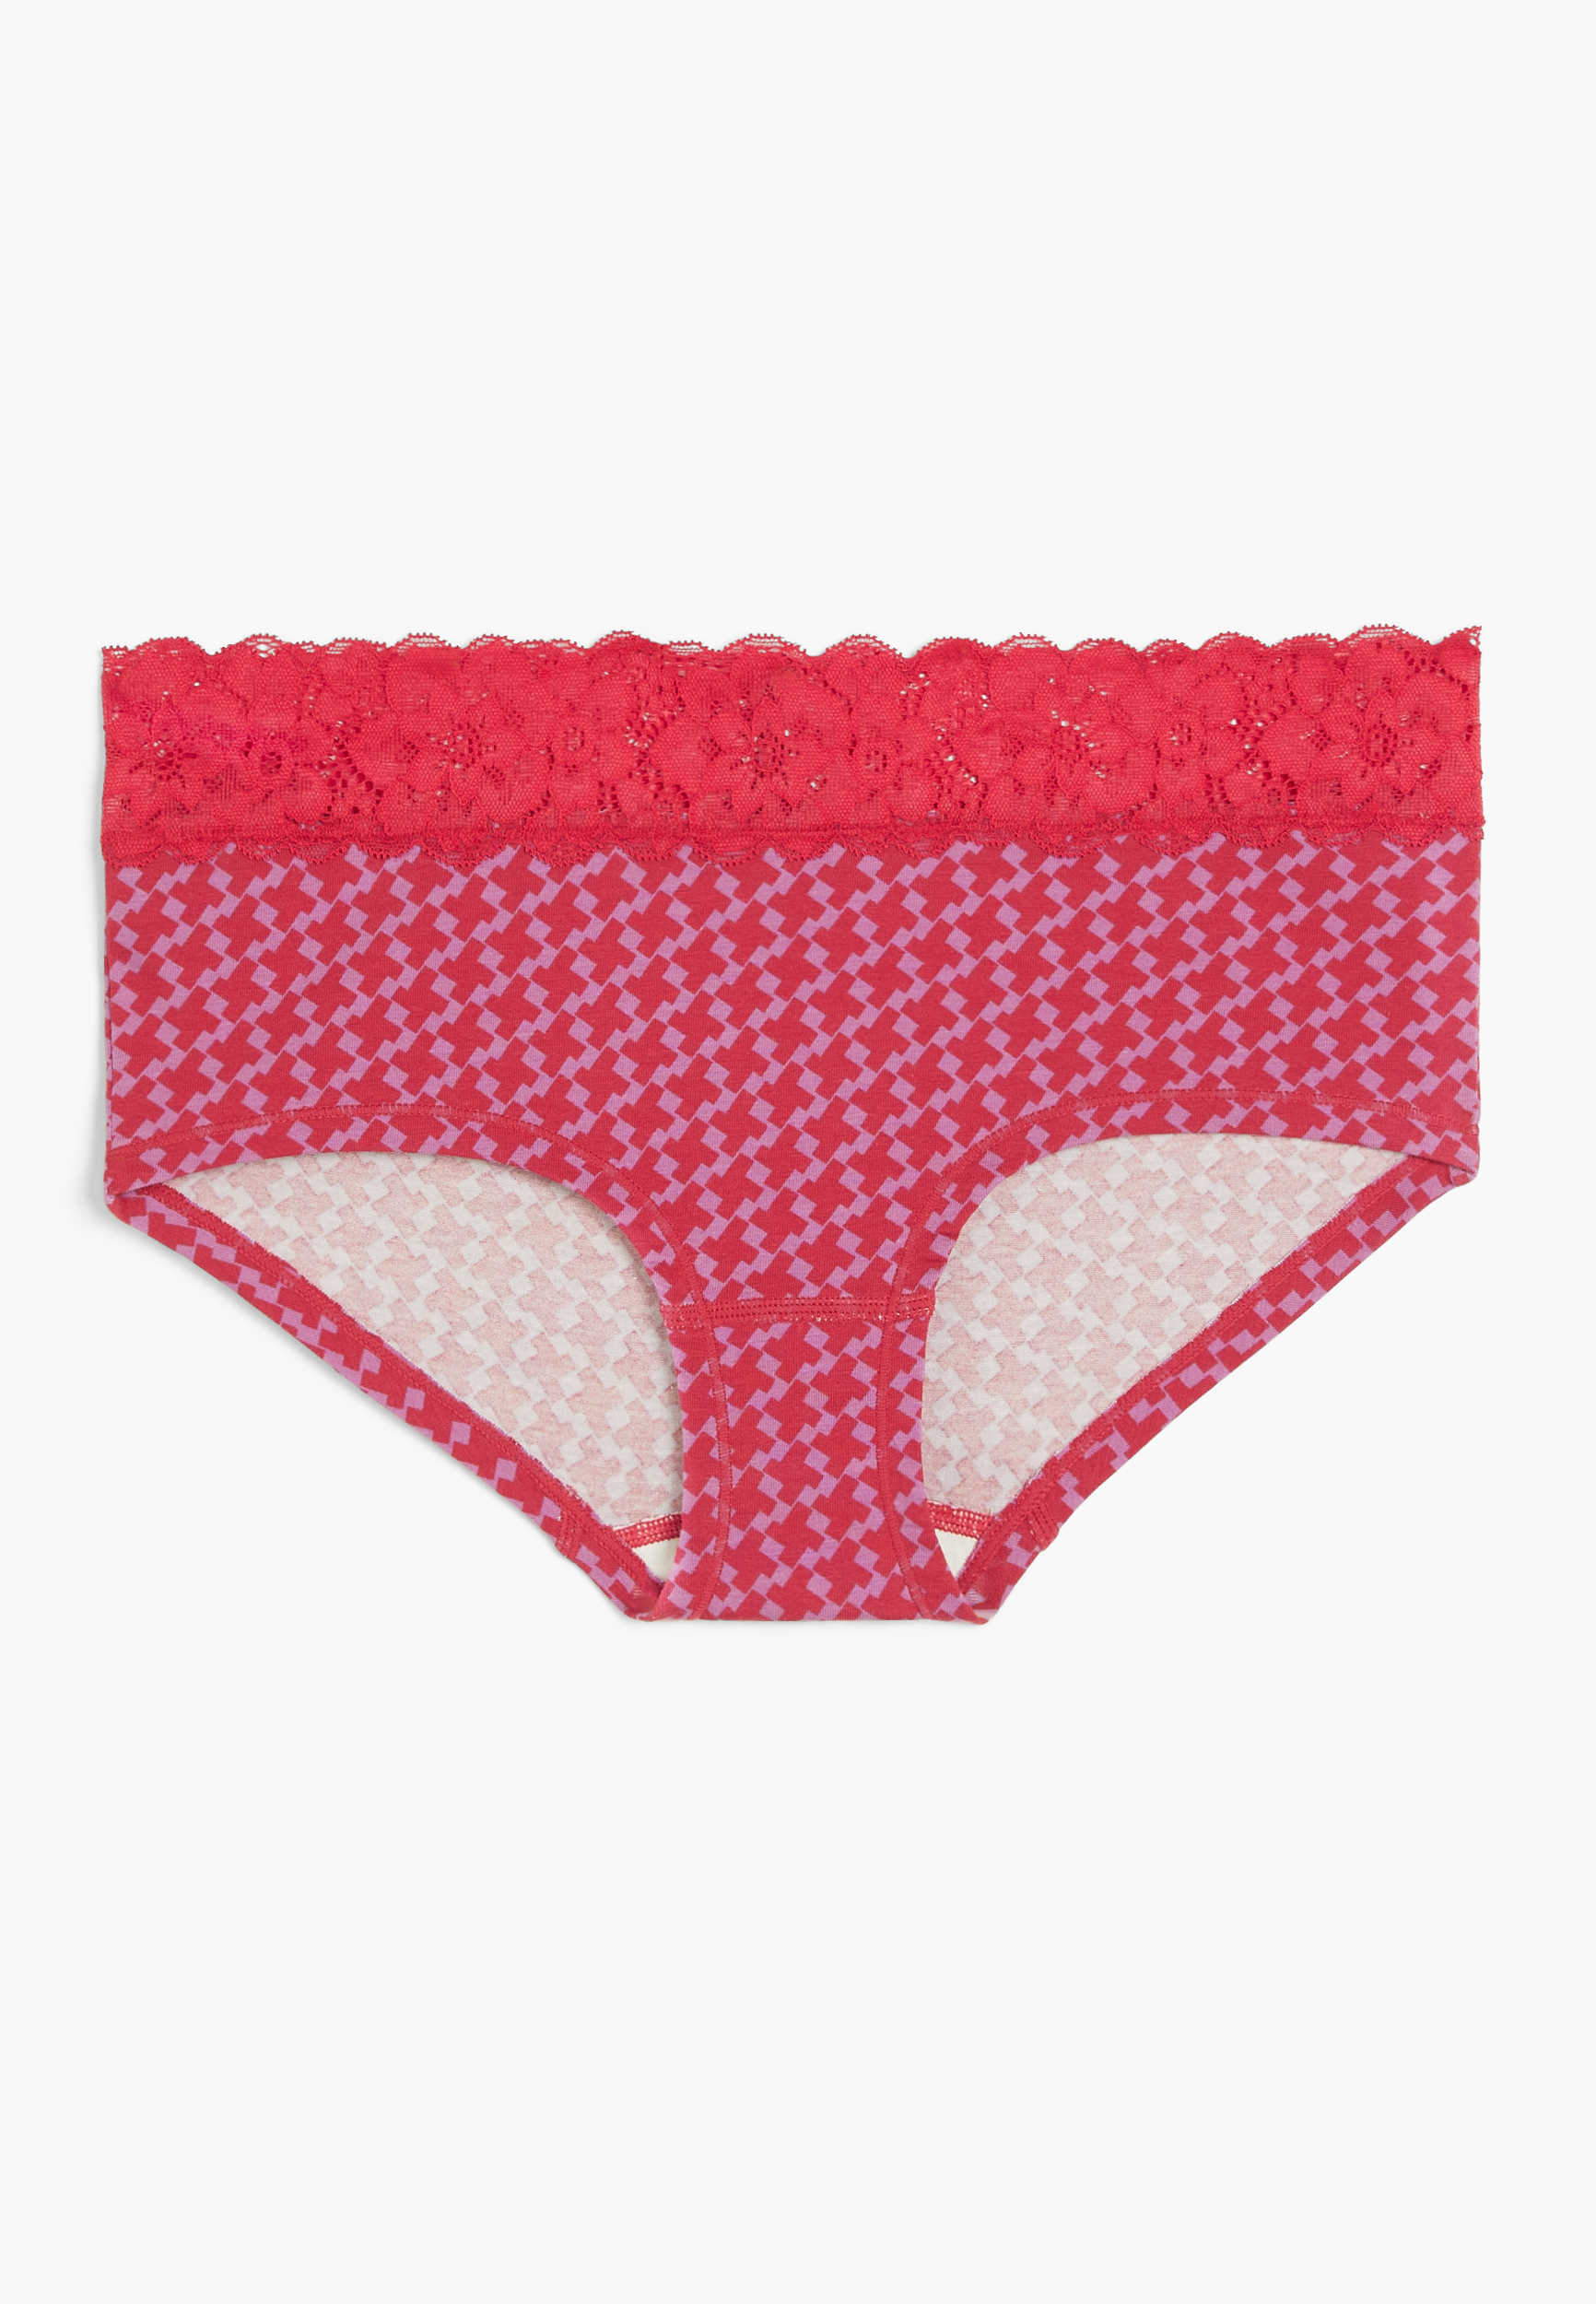 Simply Comfy Geo Cotton Boybrief Panty | maurices